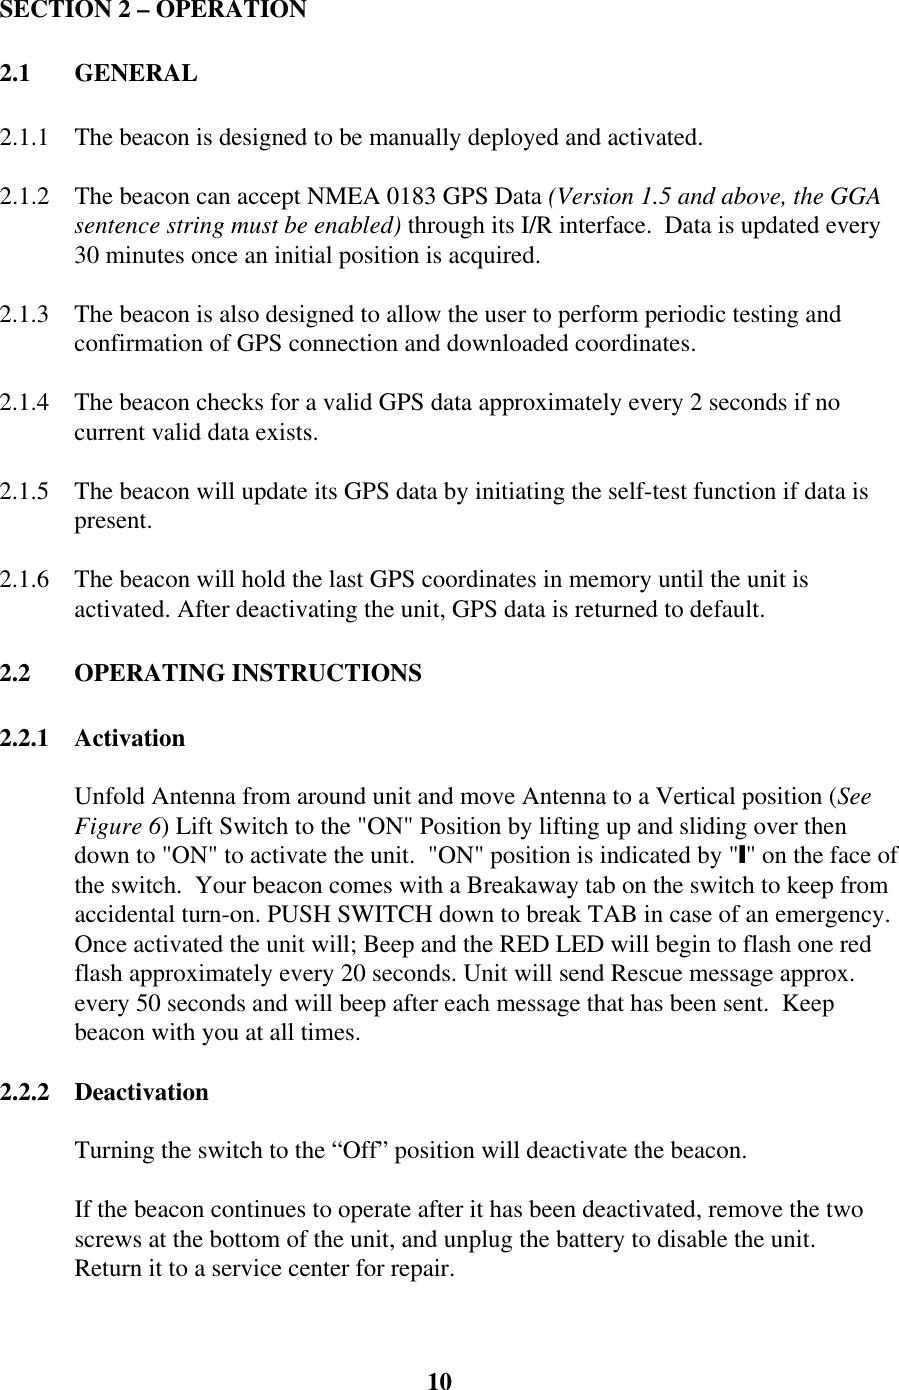 SECTION 2 – OPERATION2.1 GENERAL2.1.1 The beacon is designed to be manually deployed and activated.2.1.2 The beacon can accept NMEA 0183 GPS Data (Version 1.5 and above, the GGAsentence string must be enabled) through its I/R interface.  Data is updated every30 minutes once an initial position is acquired.2.1.3 The beacon is also designed to allow the user to perform periodic testing andconfirmation of GPS connection and downloaded coordinates.2.1.4 The beacon checks for a valid GPS data approximately every 2 seconds if nocurrent valid data exists.2.1.5 The beacon will update its GPS data by initiating the self-test function if data ispresent.2.1.6 The beacon will hold the last GPS coordinates in memory until the unit isactivated. After deactivating the unit, GPS data is returned to default.2.2 OPERATING INSTRUCTIONS2.2.1 ActivationUnfold Antenna from around unit and move Antenna to a Vertical position (SeeFigure 6) Lift Switch to the &quot;ON&quot; Position by lifting up and sliding over thendown to &quot;ON&quot; to activate the unit.  &quot;ON&quot; position is indicated by &quot;y&quot; on the face ofthe switch.  Your beacon comes with a Breakaway tab on the switch to keep fromaccidental turn-on. PUSH SWITCH down to break TAB in case of an emergency.Once activated the unit will; Beep and the RED LED will begin to flash one redflash approximately every 20 seconds. Unit will send Rescue message approx.every 50 seconds and will beep after each message that has been sent.  Keepbeacon with you at all times.2.2.2 DeactivationTurning the switch to the “Off” position will deactivate the beacon.If the beacon continues to operate after it has been deactivated, remove the twoscrews at the bottom of the unit, and unplug the battery to disable the unit.Return it to a service center for repair.10